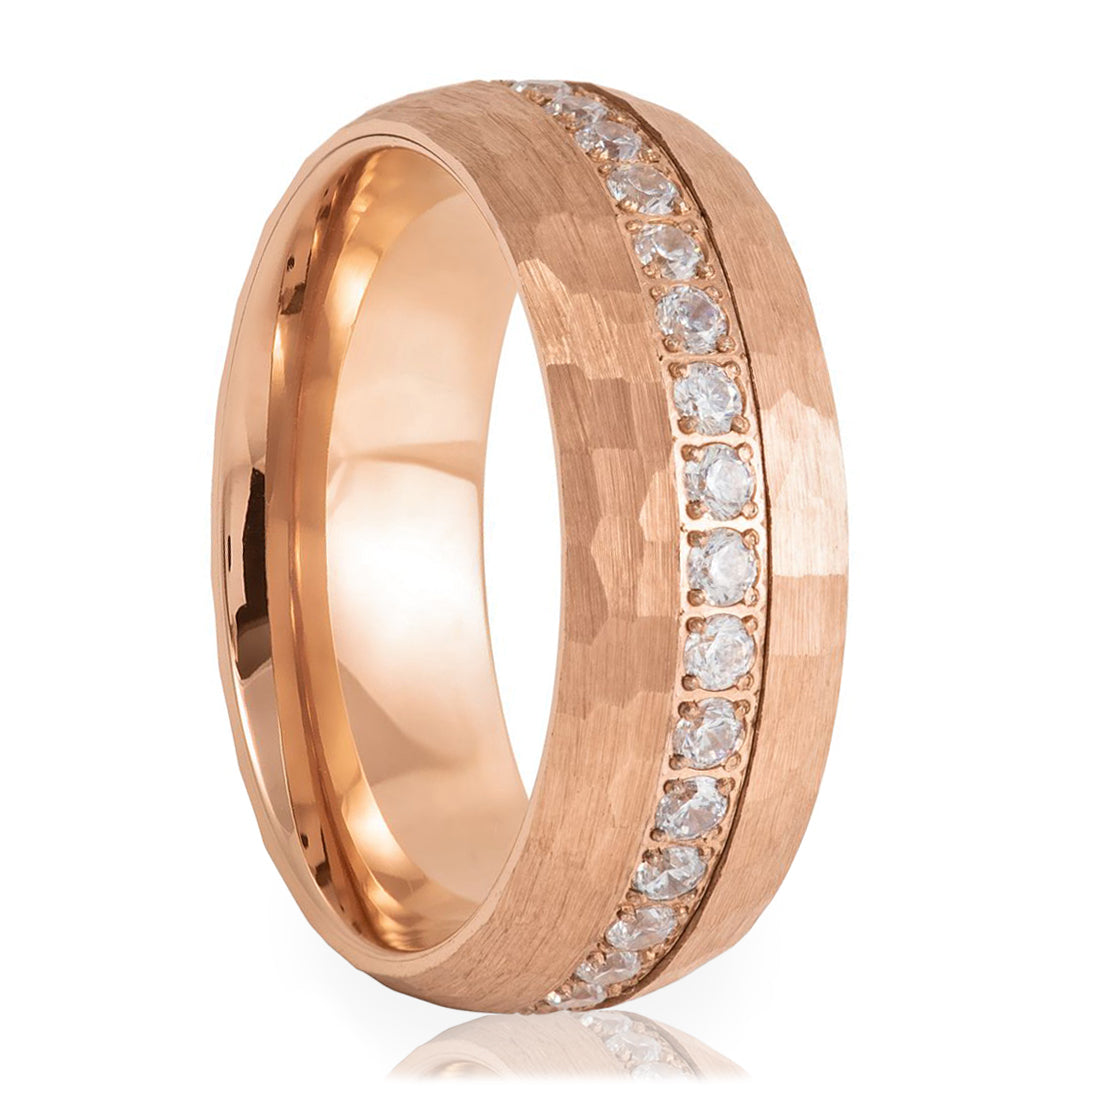 Hammered Rose Gold Tungsten Men's Wedding Band with Cubic Zirconia